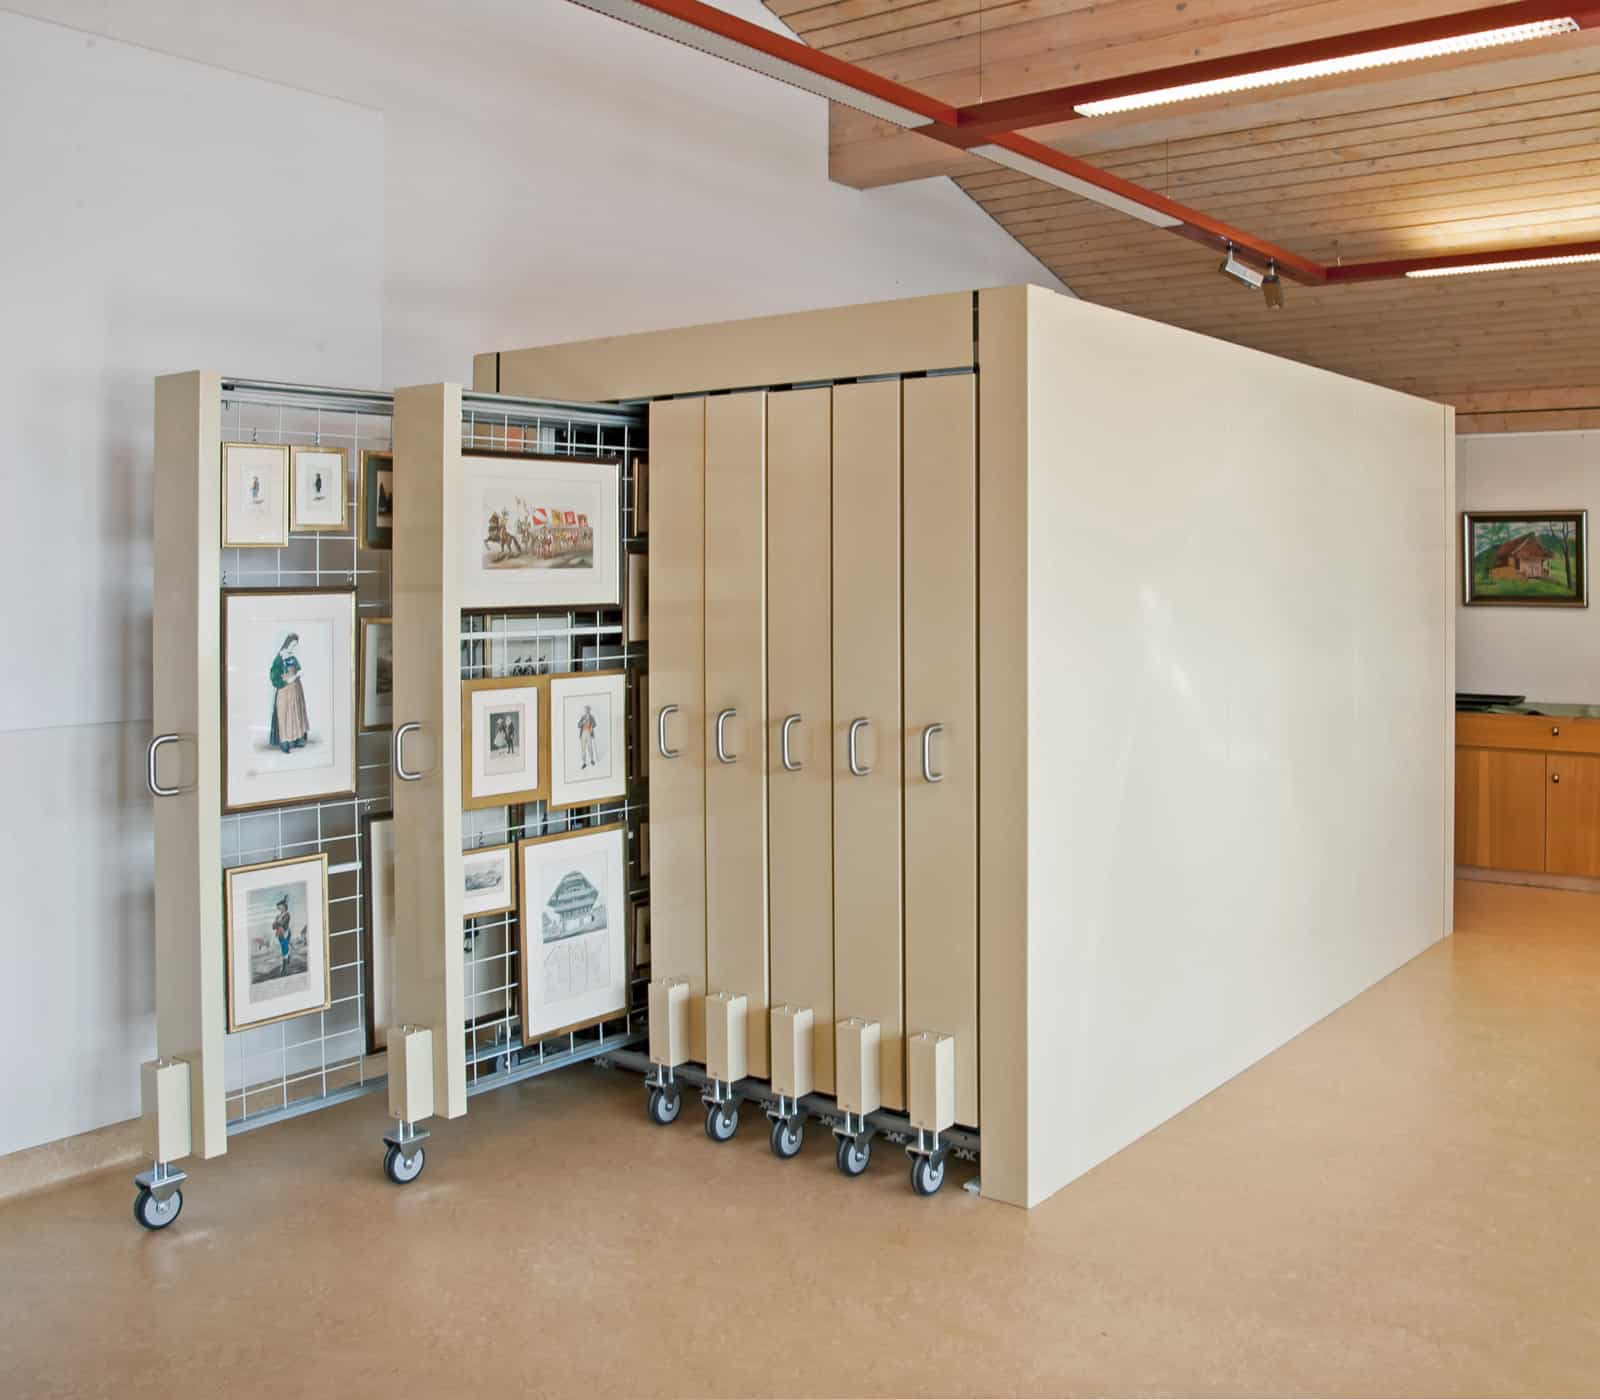 Art storage closed system made of powder-coated sheet steel